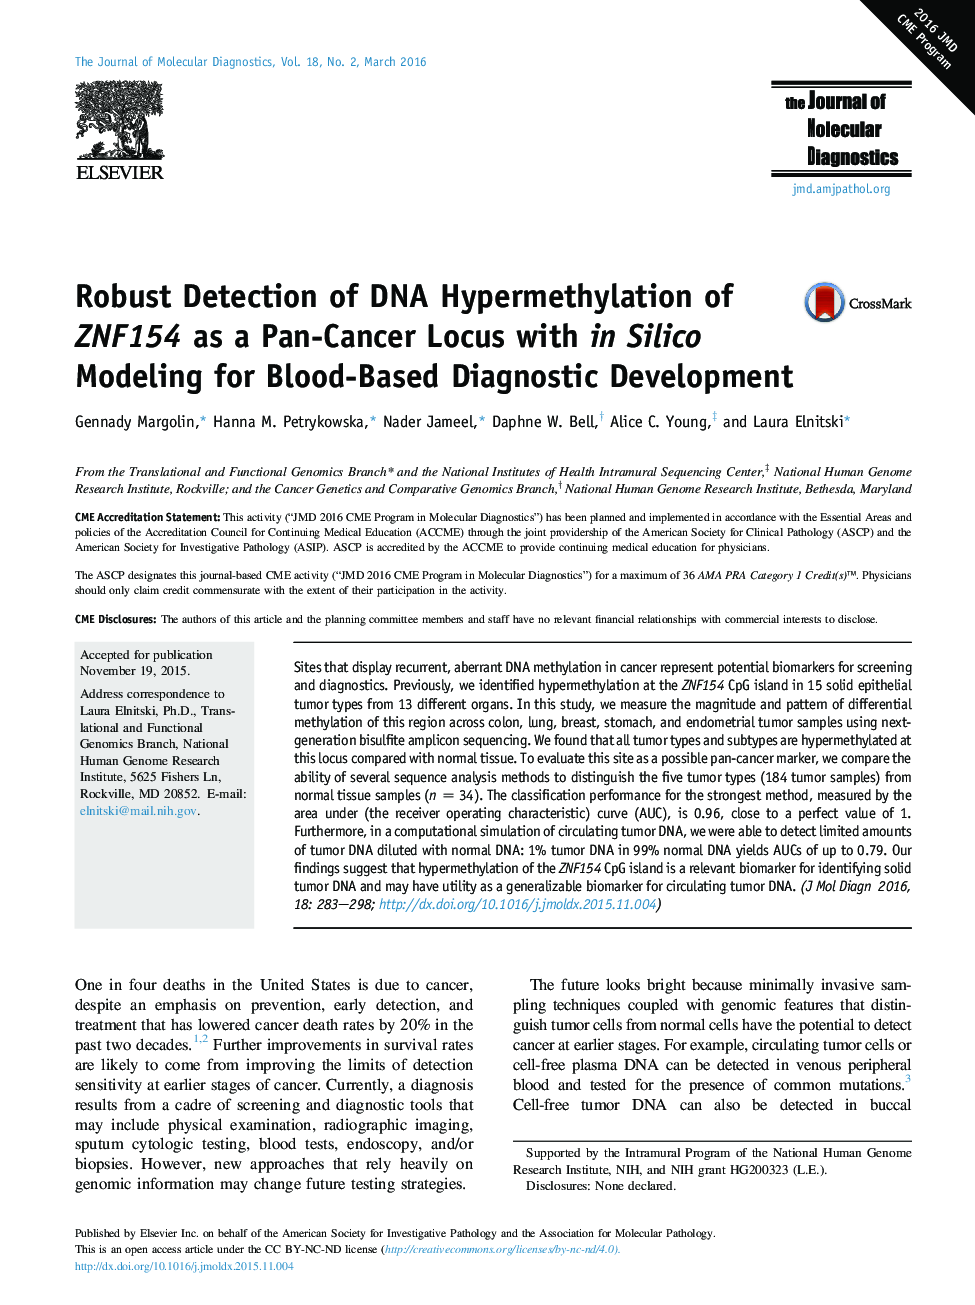 Regular articleRobust Detection of DNA Hypermethylation of ZNF154 as a Pan-Cancer Locus with in Silico Modeling for Blood-Based Diagnostic Development